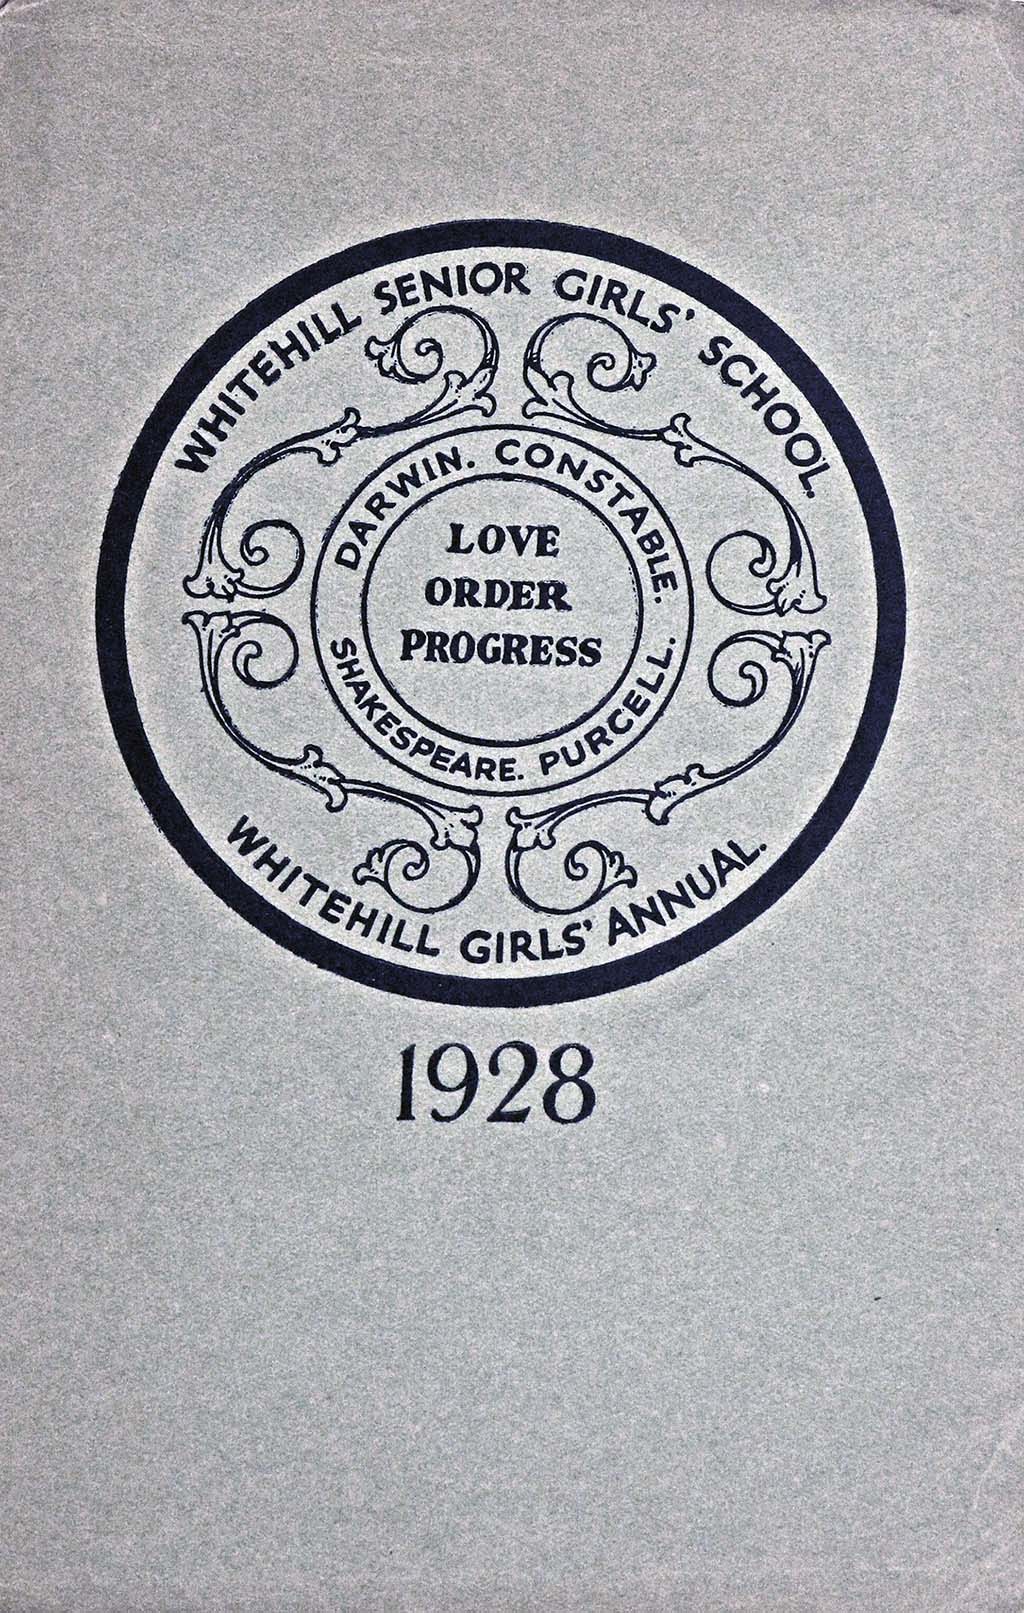 Cover of WhiteHill girls annual 1928